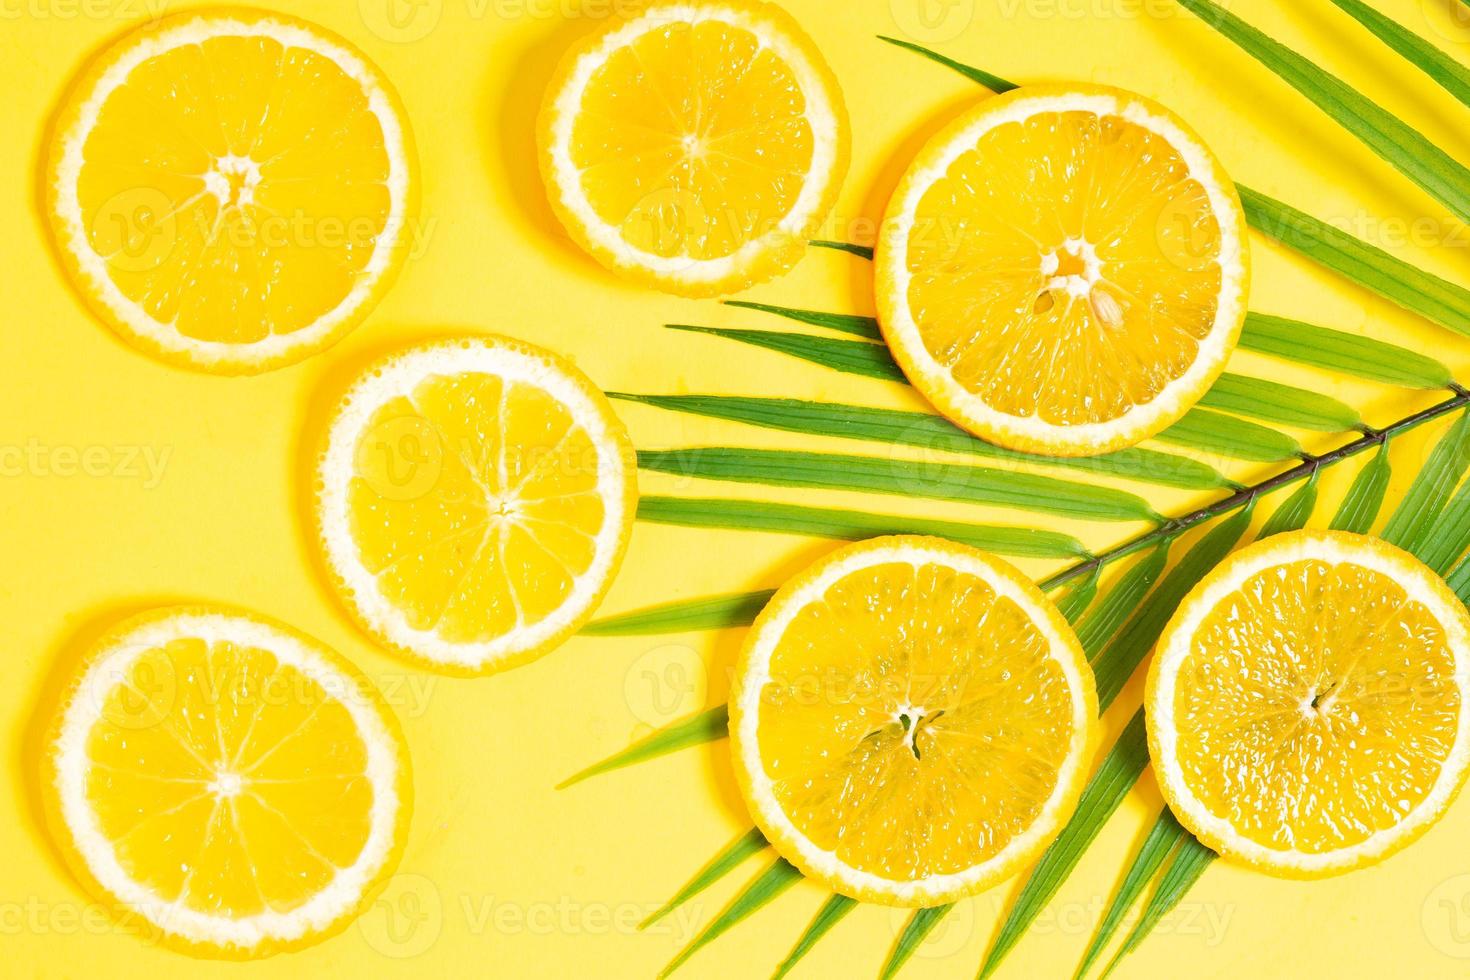 Orange slices placed on a yellow background photo